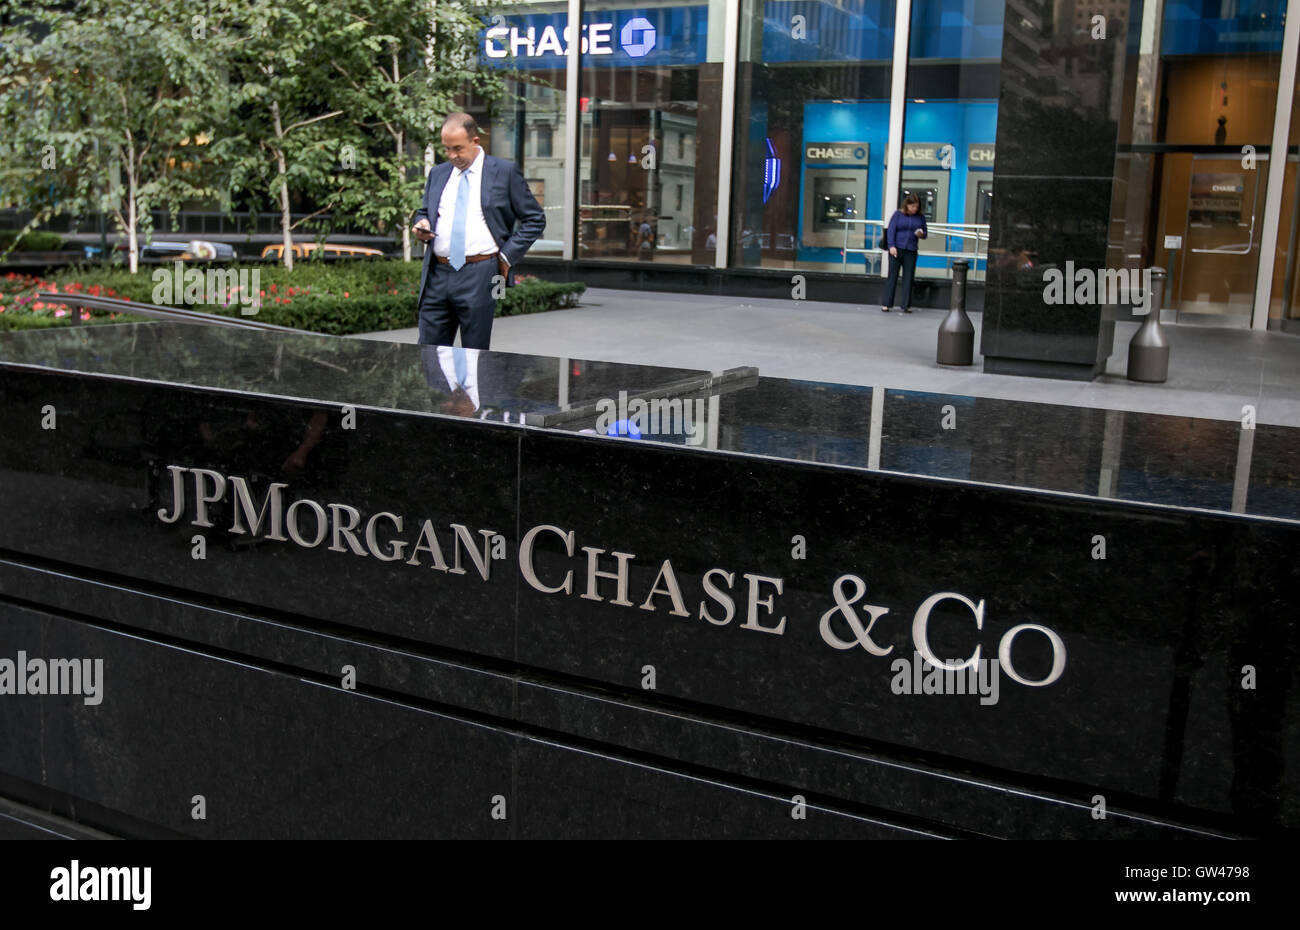 Corporate sign for JPMorgan Chase at one of their Manhattan office locations. Stock Photo